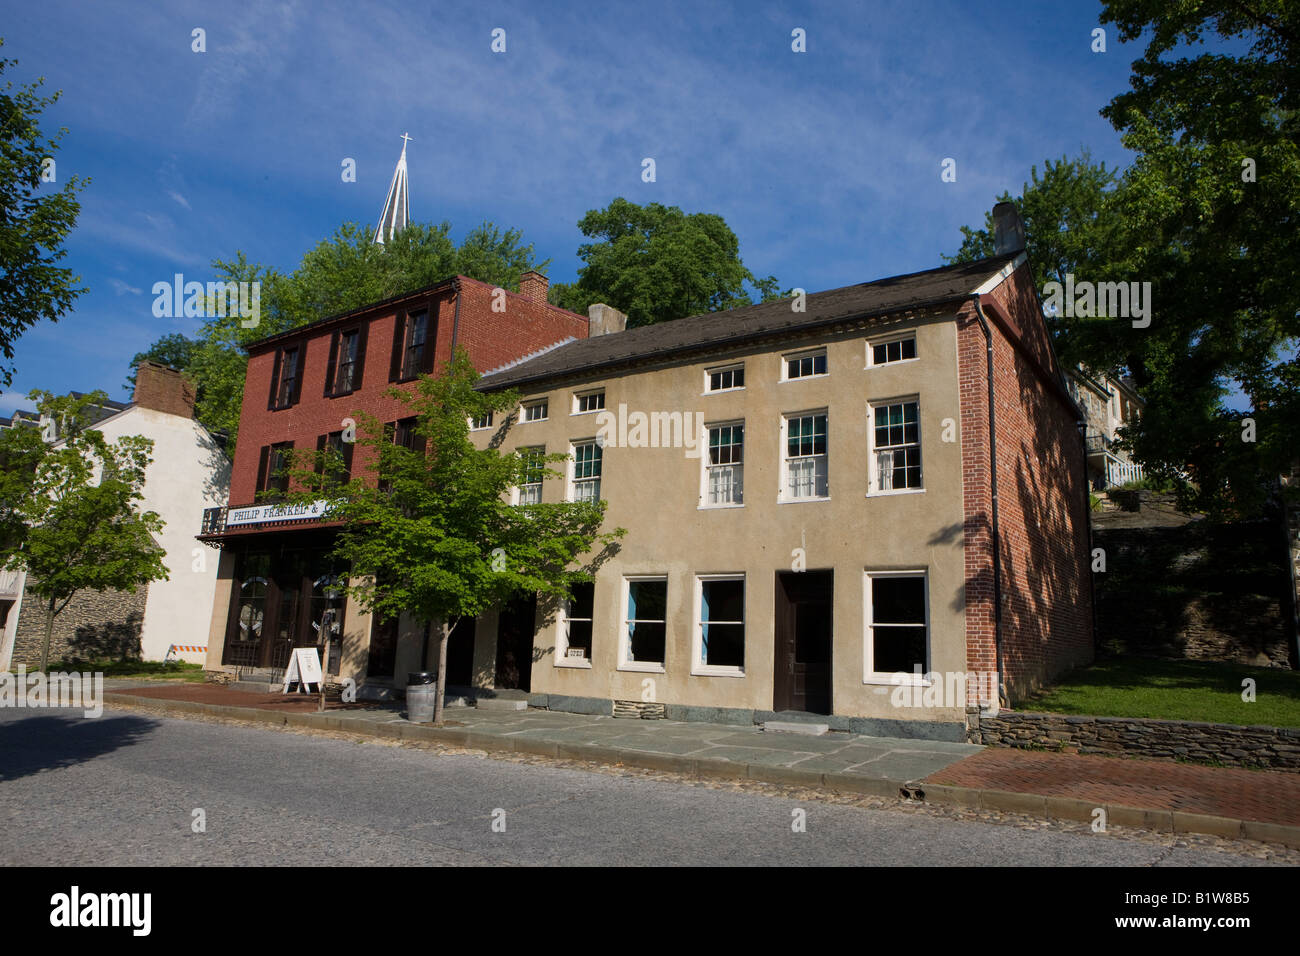 Restoration Museum (right) Philip Frankel's Clothing Store (left) located on Shenandoah Street in Lower Town Harpers Ferry WV Stock Photo